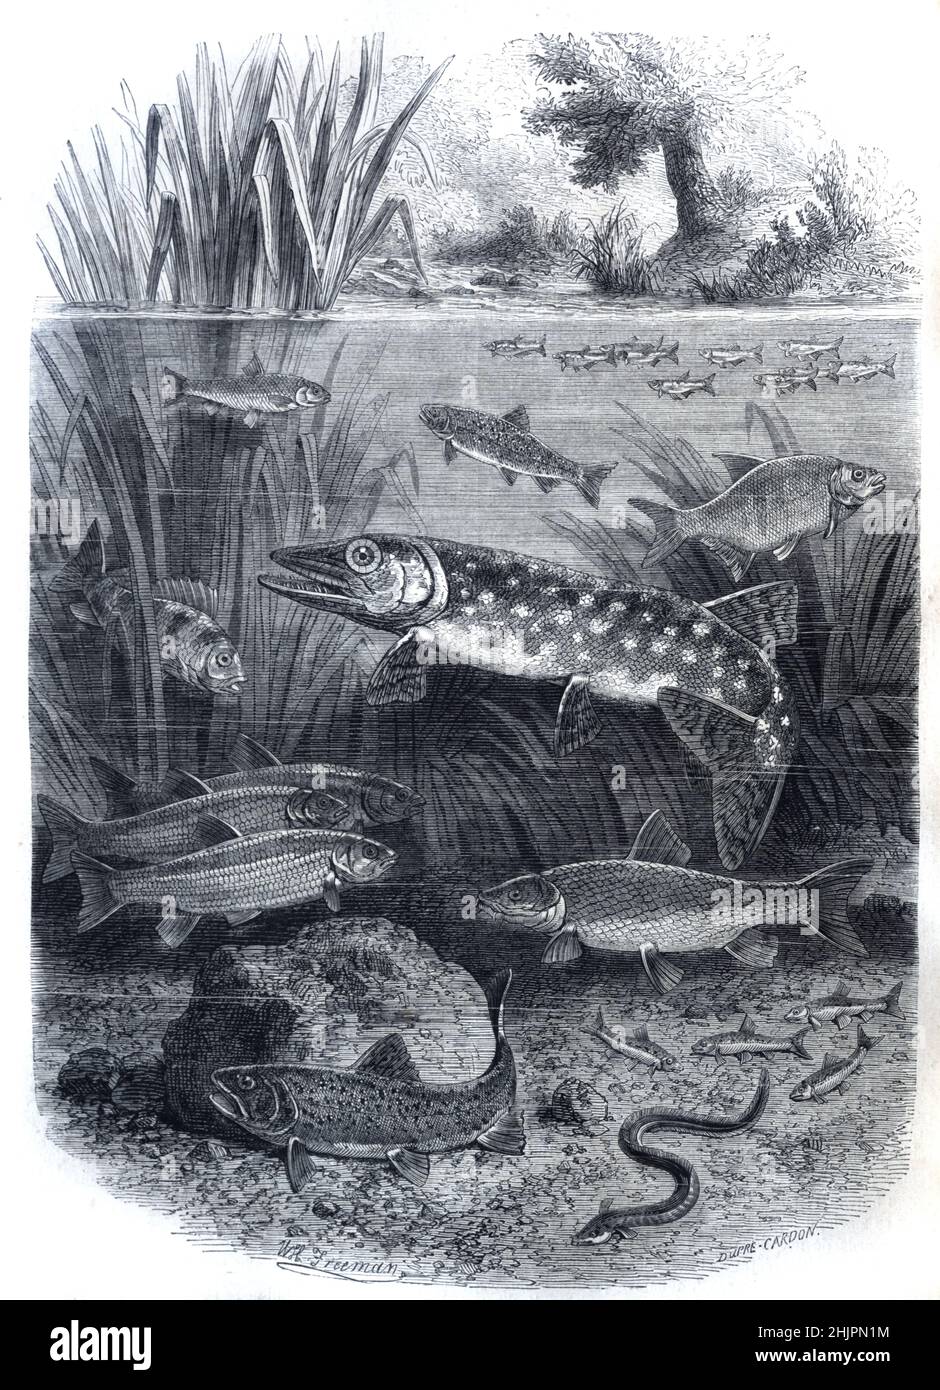 Illustration Showing Different Feeding Levels, Trophic Levels or Zones of Freshwater Fish including Bottom Feeders & Surface Feeders and  River Ecosystem Vintage Illustration or Engraving 1865 Stock Photo